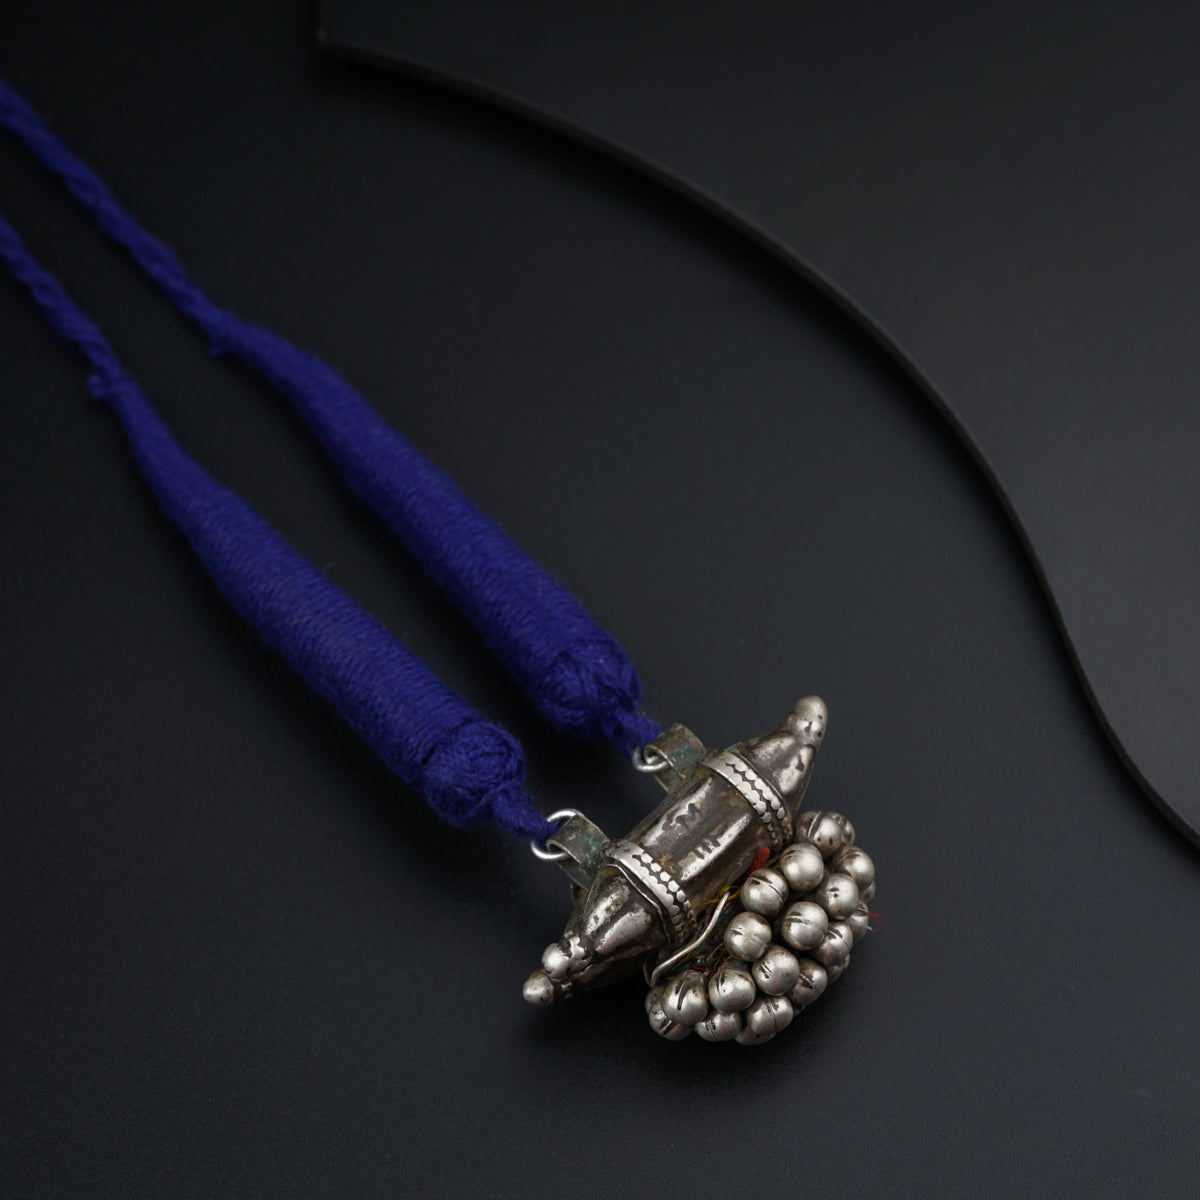 a silver object with a blue cord on a black surface